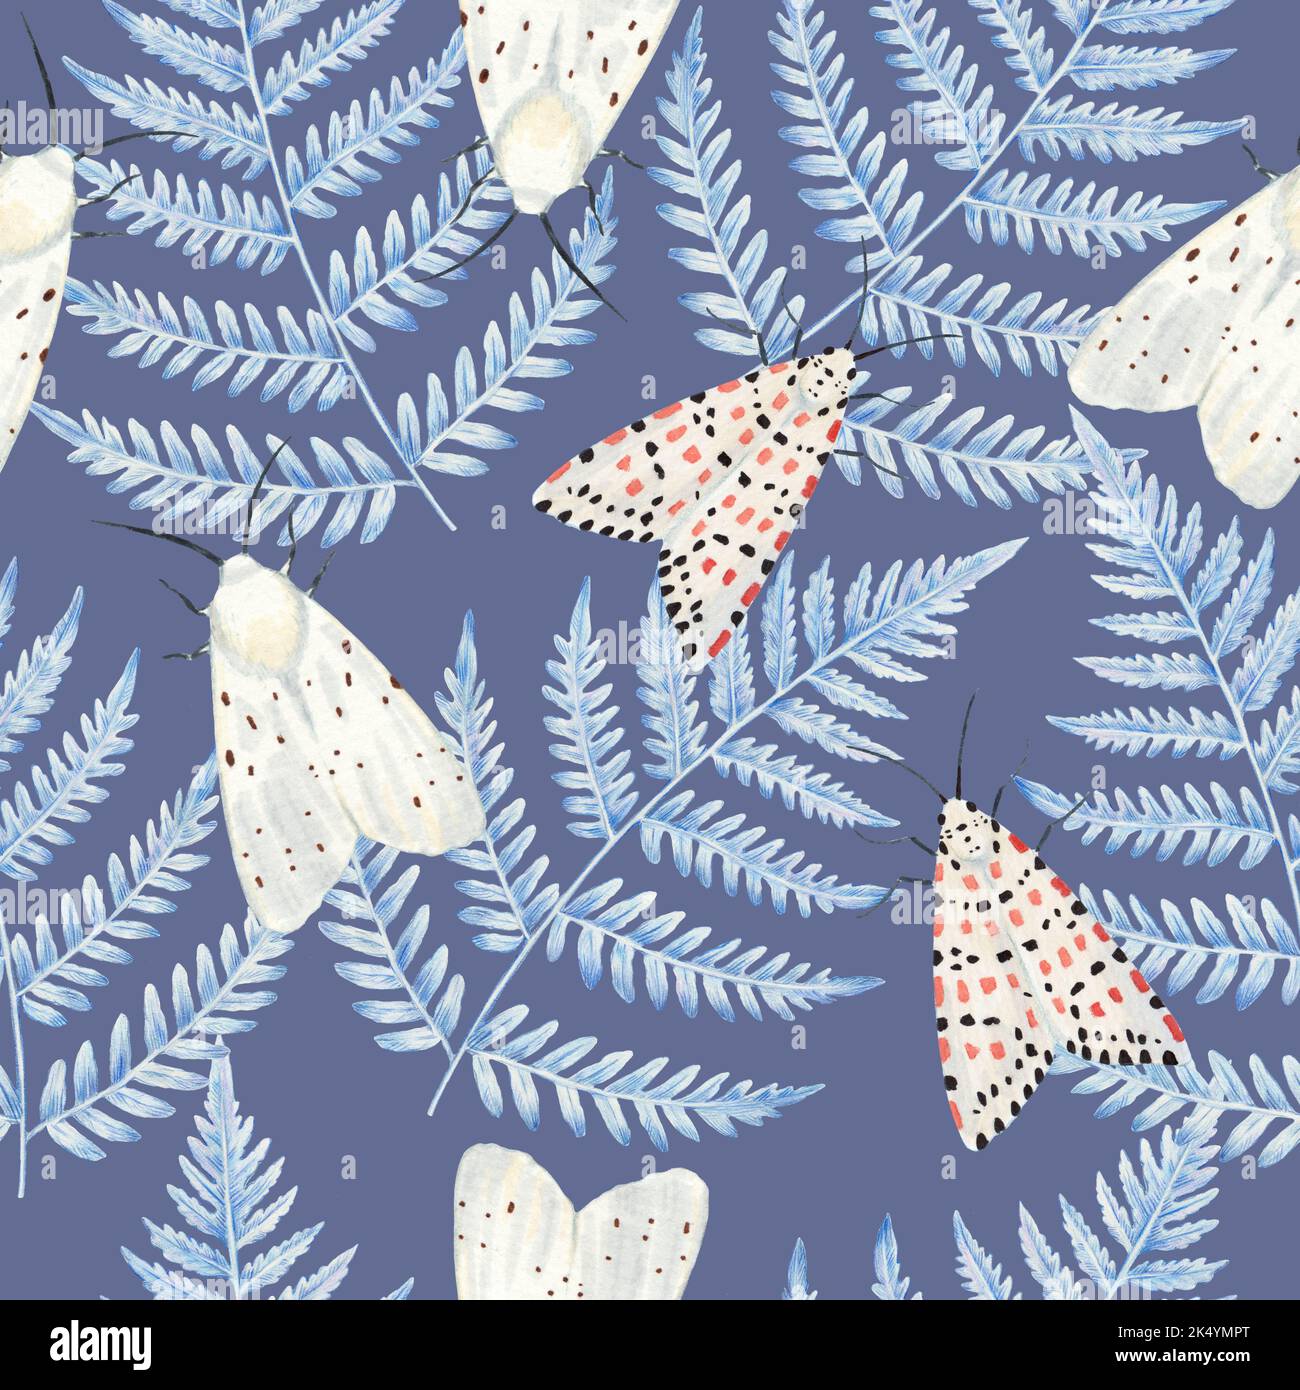 Hand drawn seamless pattern with fern leaves and white cute moths. Detailed watercolor botanical illustration. Stock Photo